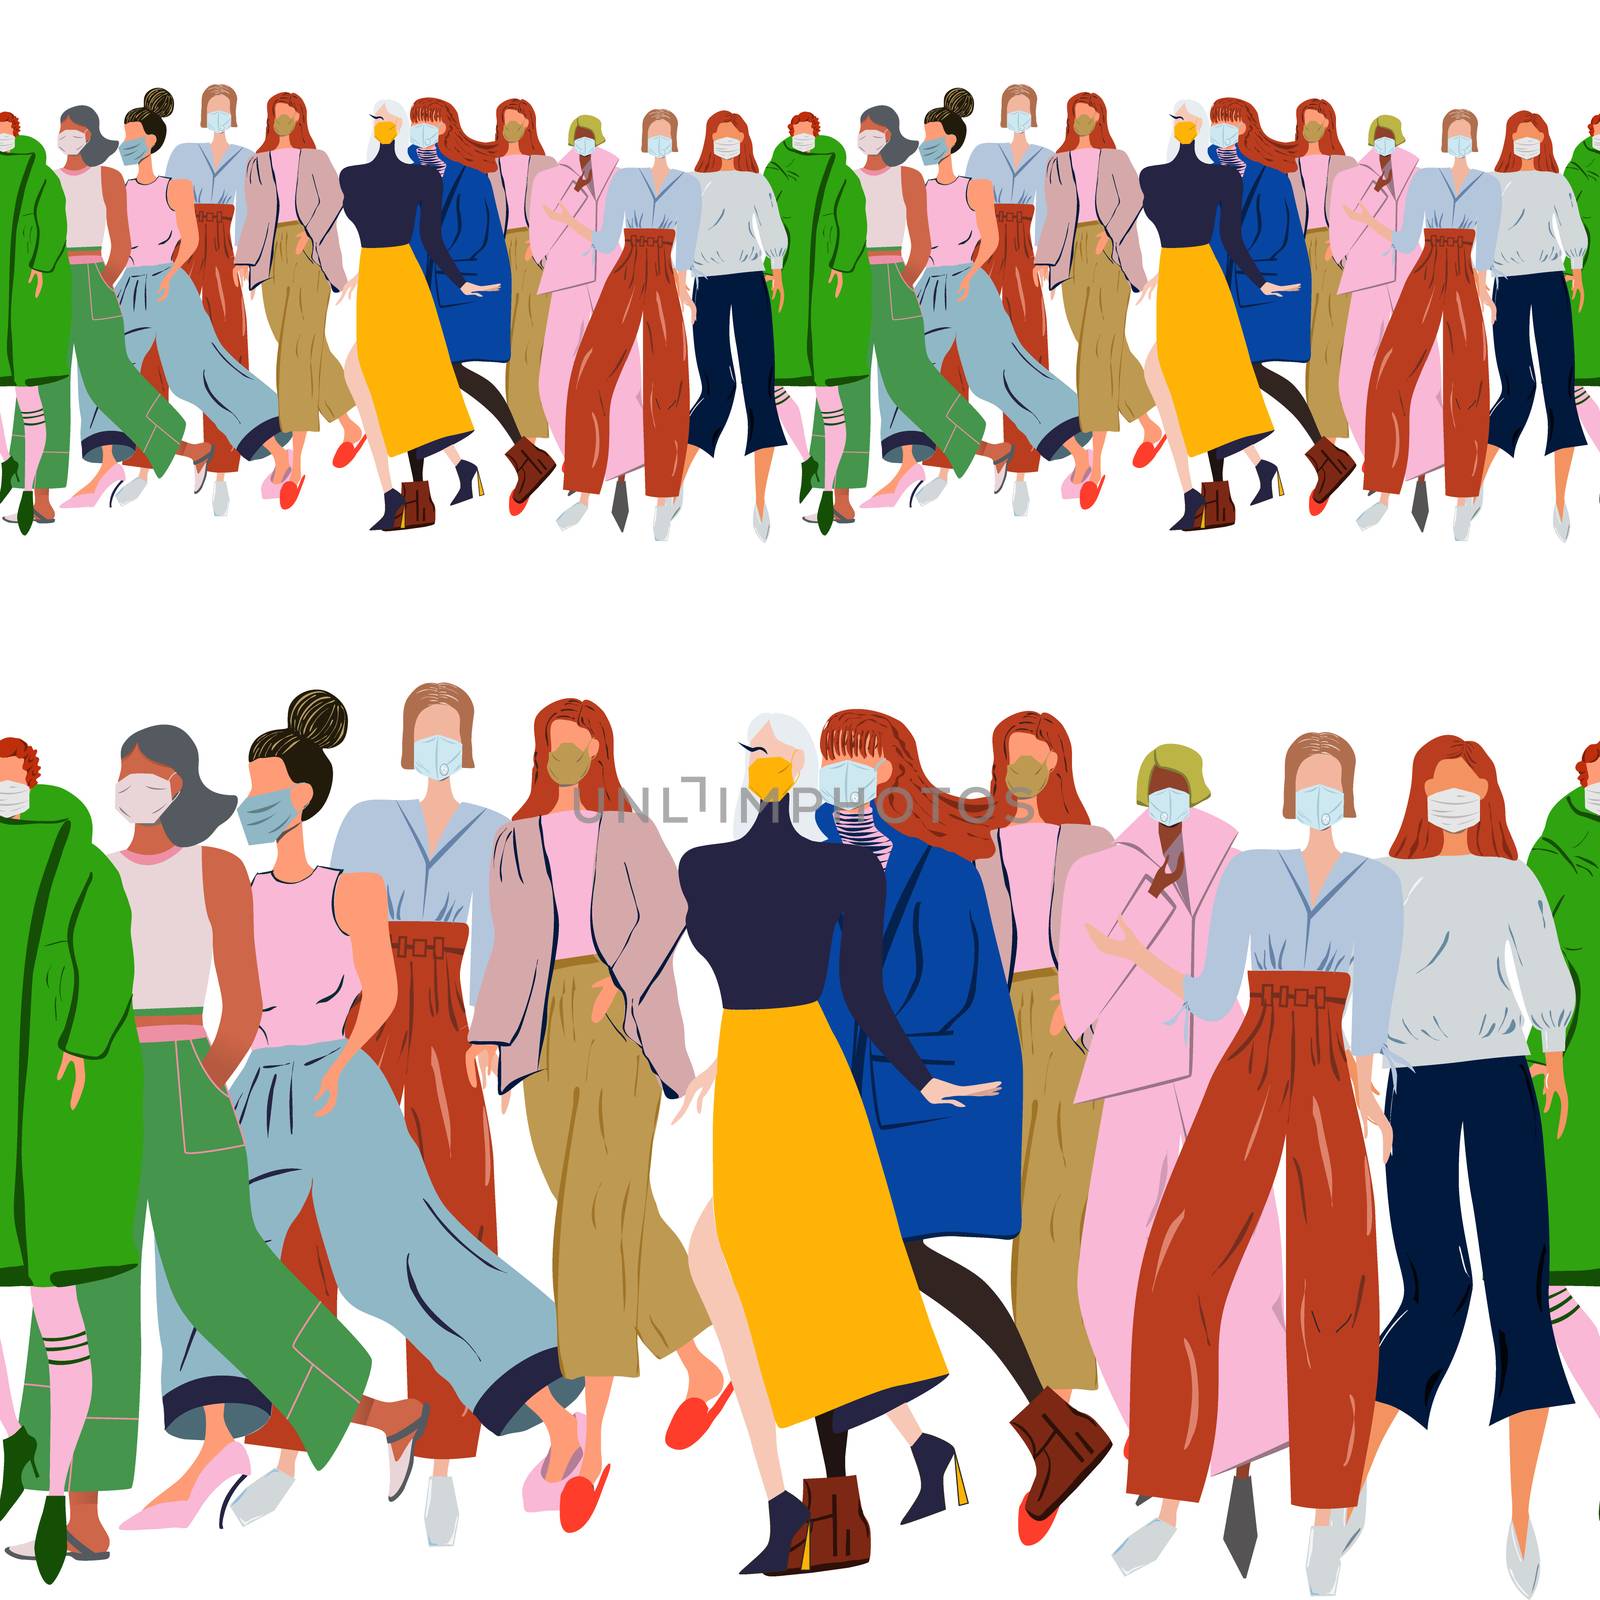 Seamless border with fashion women wearing protective face mask. Latest trend news, fashion bloggers post. Flat cartoon illustration with copyspace on white background. Vector illustration.